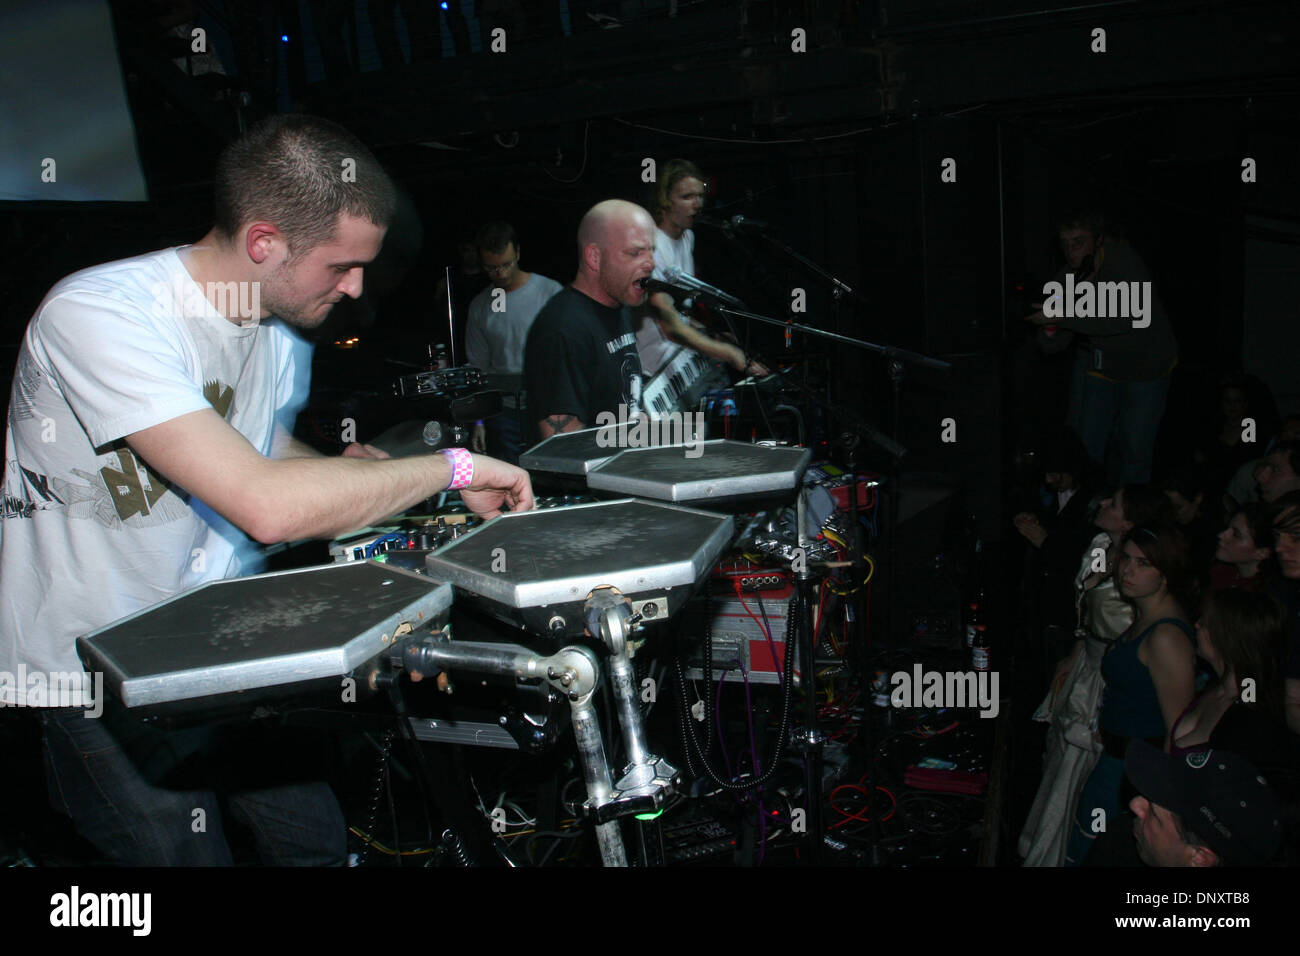 Dec 30, 2005; New York, NY, US; John MaClean (bald) aka Juan Maclean performing with his band at Avalon on Friday night December 30, 2005. Nick is on the drum pads, Jerry on snare drums and cymbals, Eric is playing Theremin. Mandatory Credit: Photo by Aviv Small/ZUMA Press. (©) Copyright 2005 by Aviv Small Stock Photo